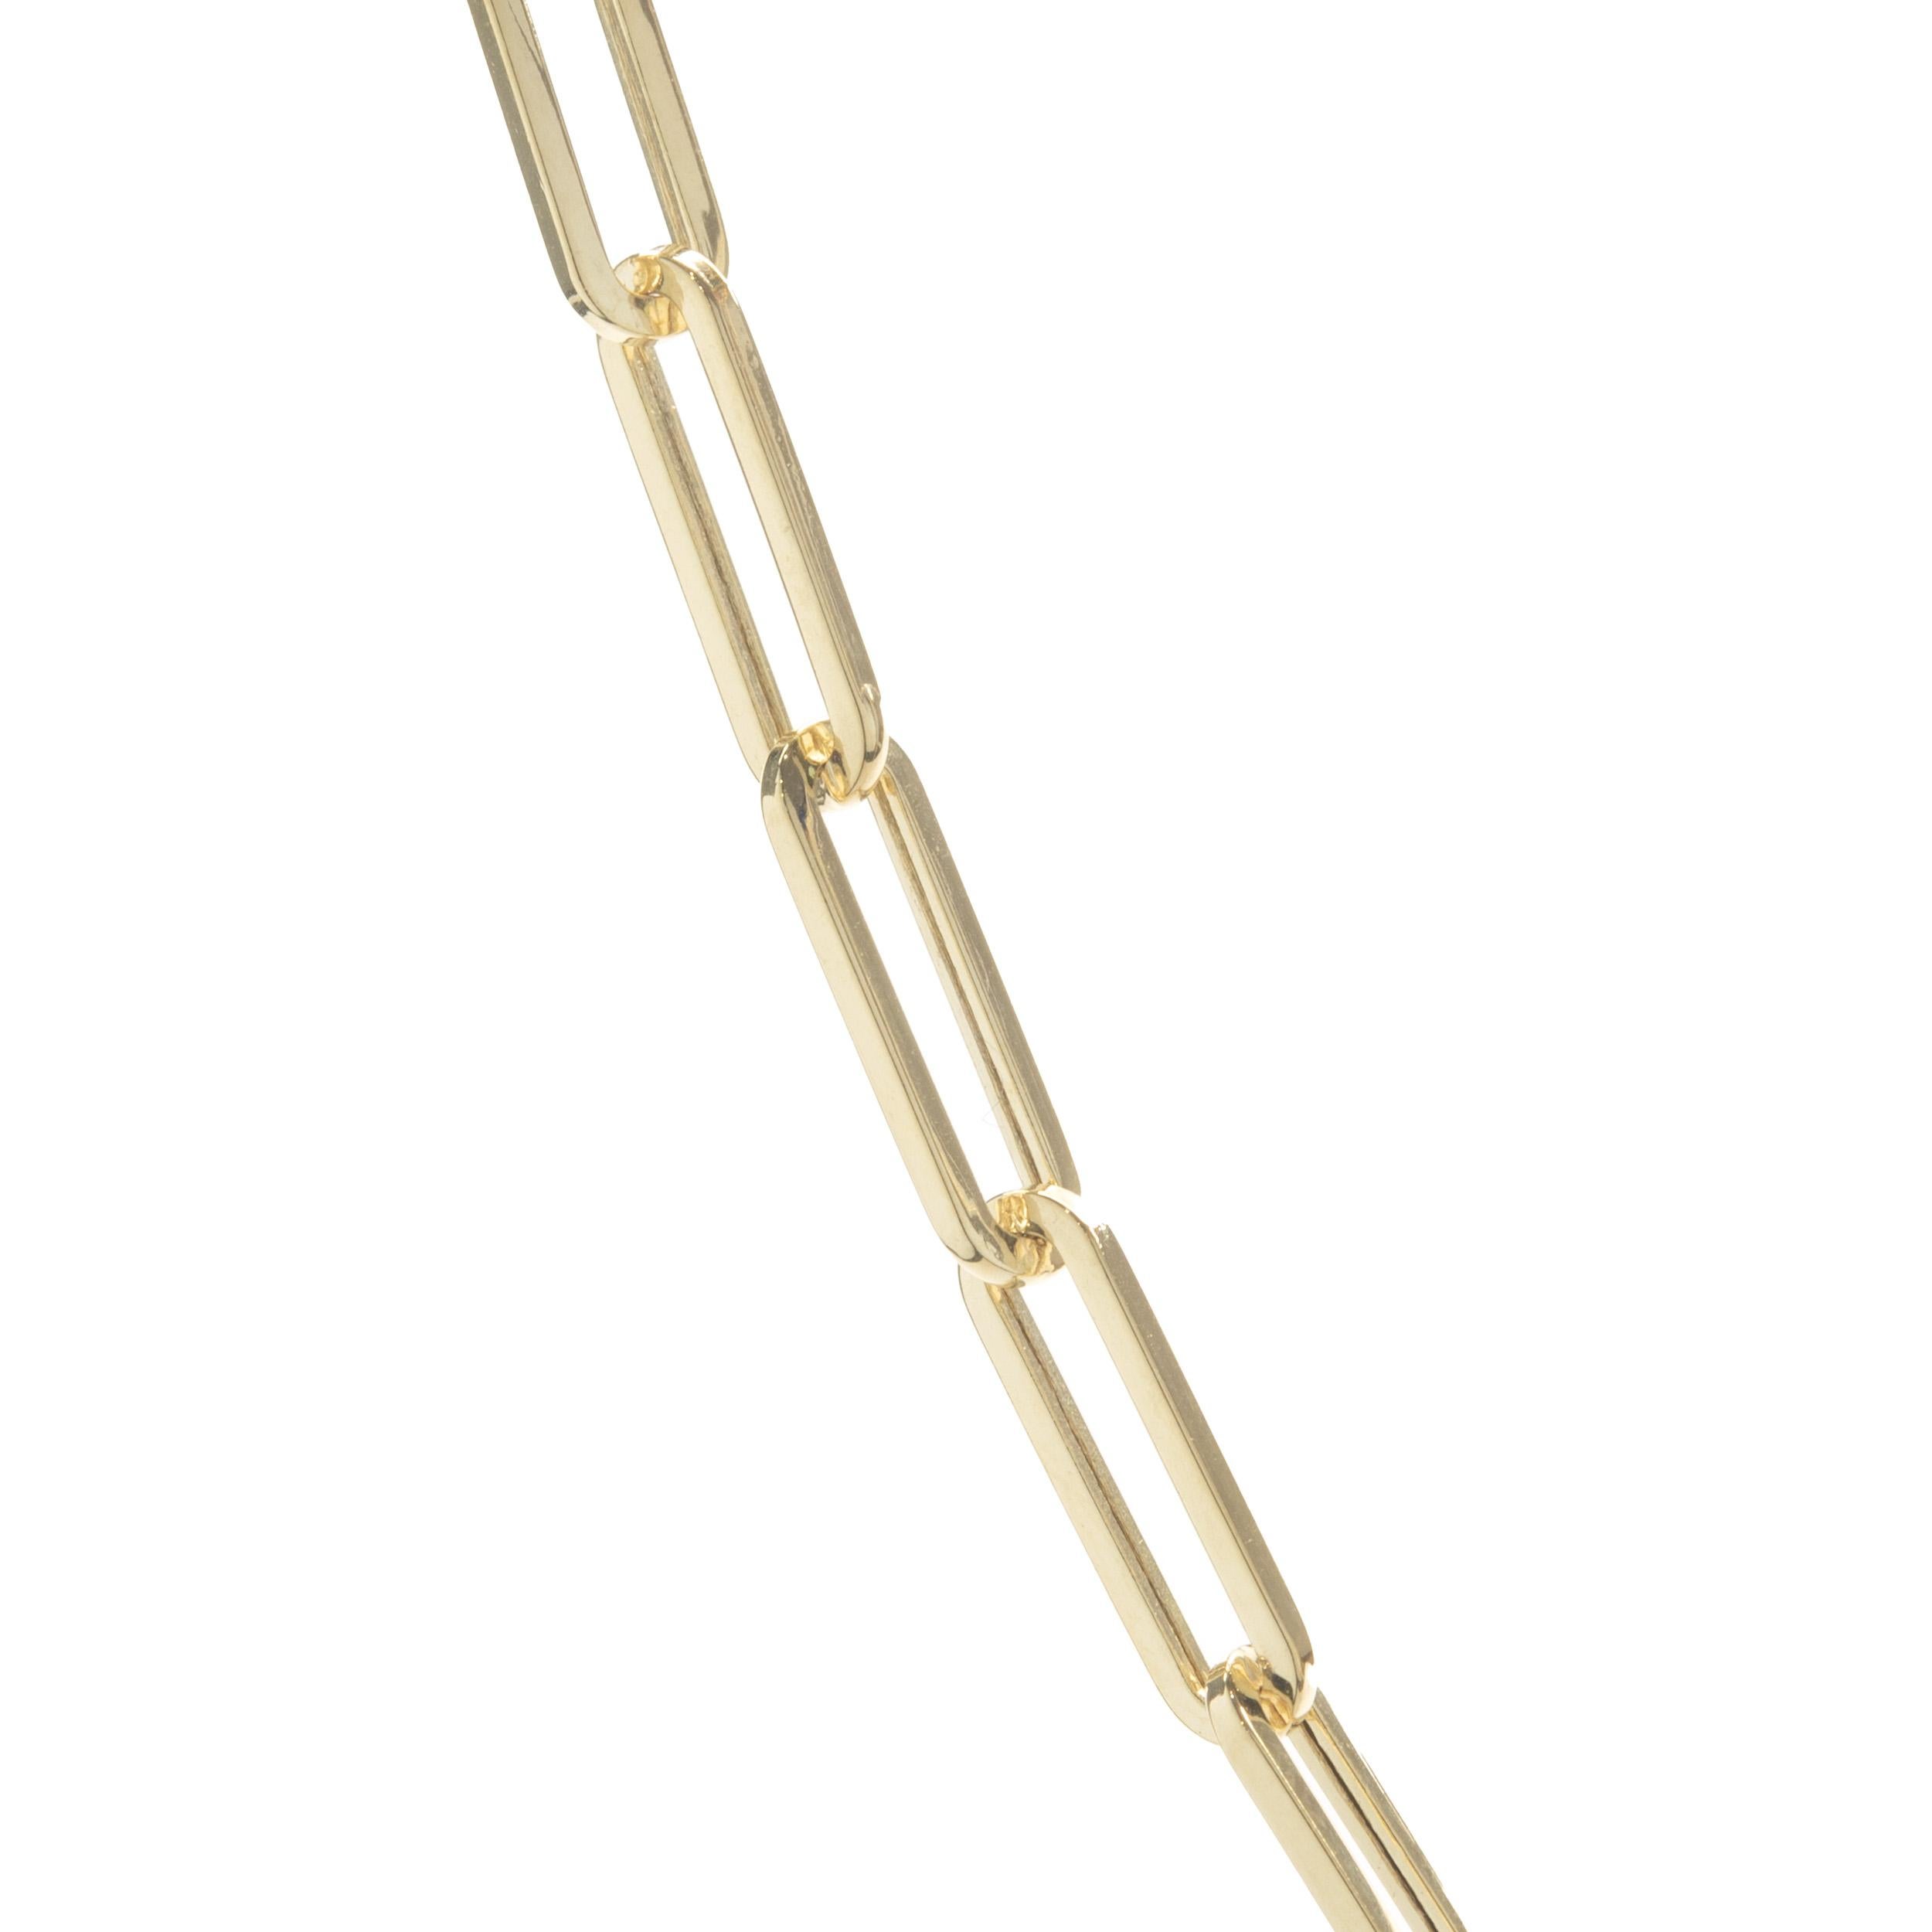 Material: 14K yellow gold
Dimensions: necklace measures 18-inches in length
Weight: 5.01 grams